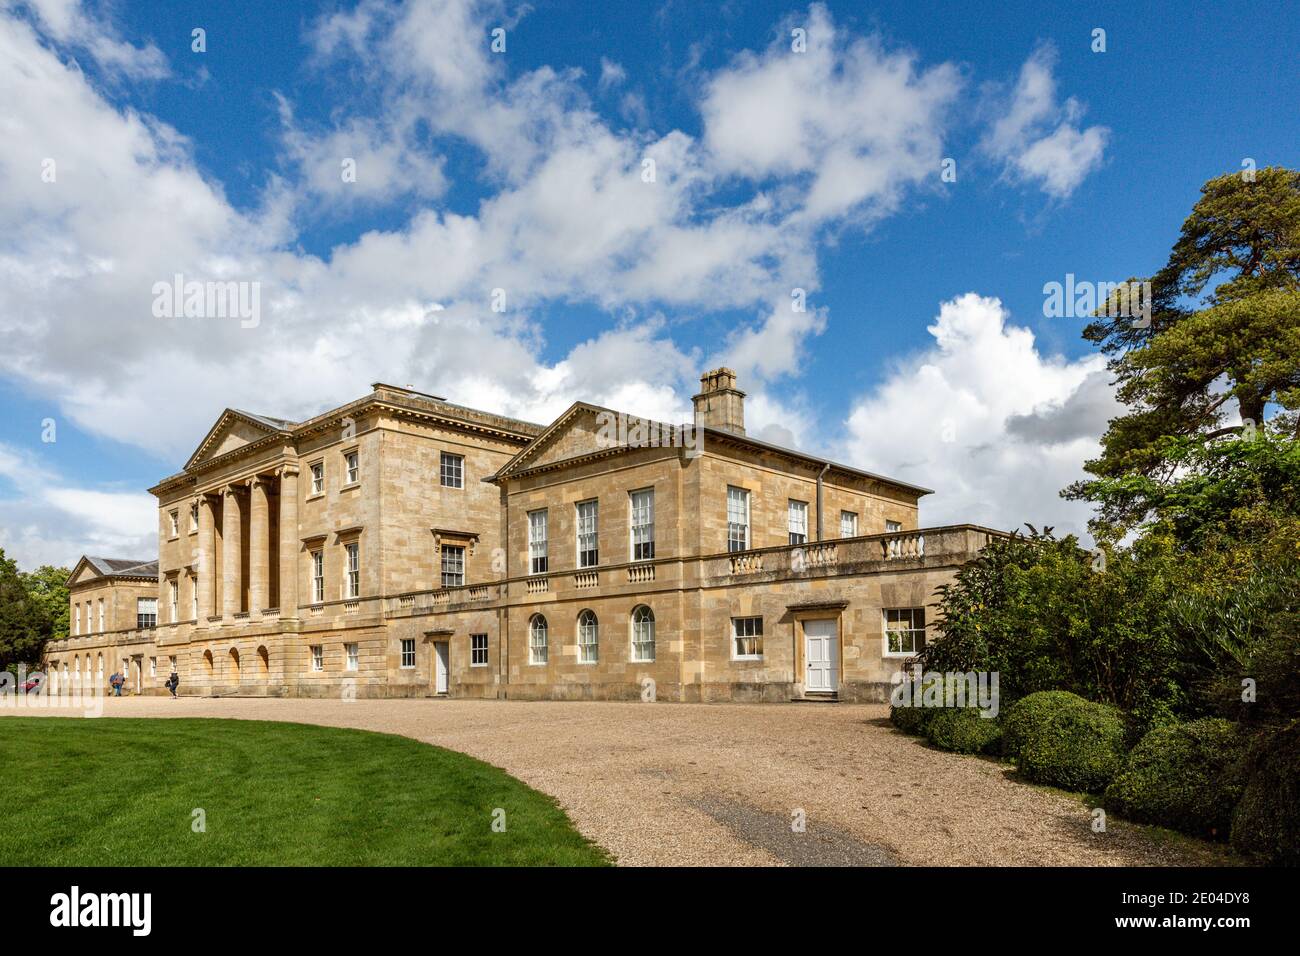 Basildon Park House in Berkshire, England, a Grade I listed country house designed by John Carr of York. Stock Photo